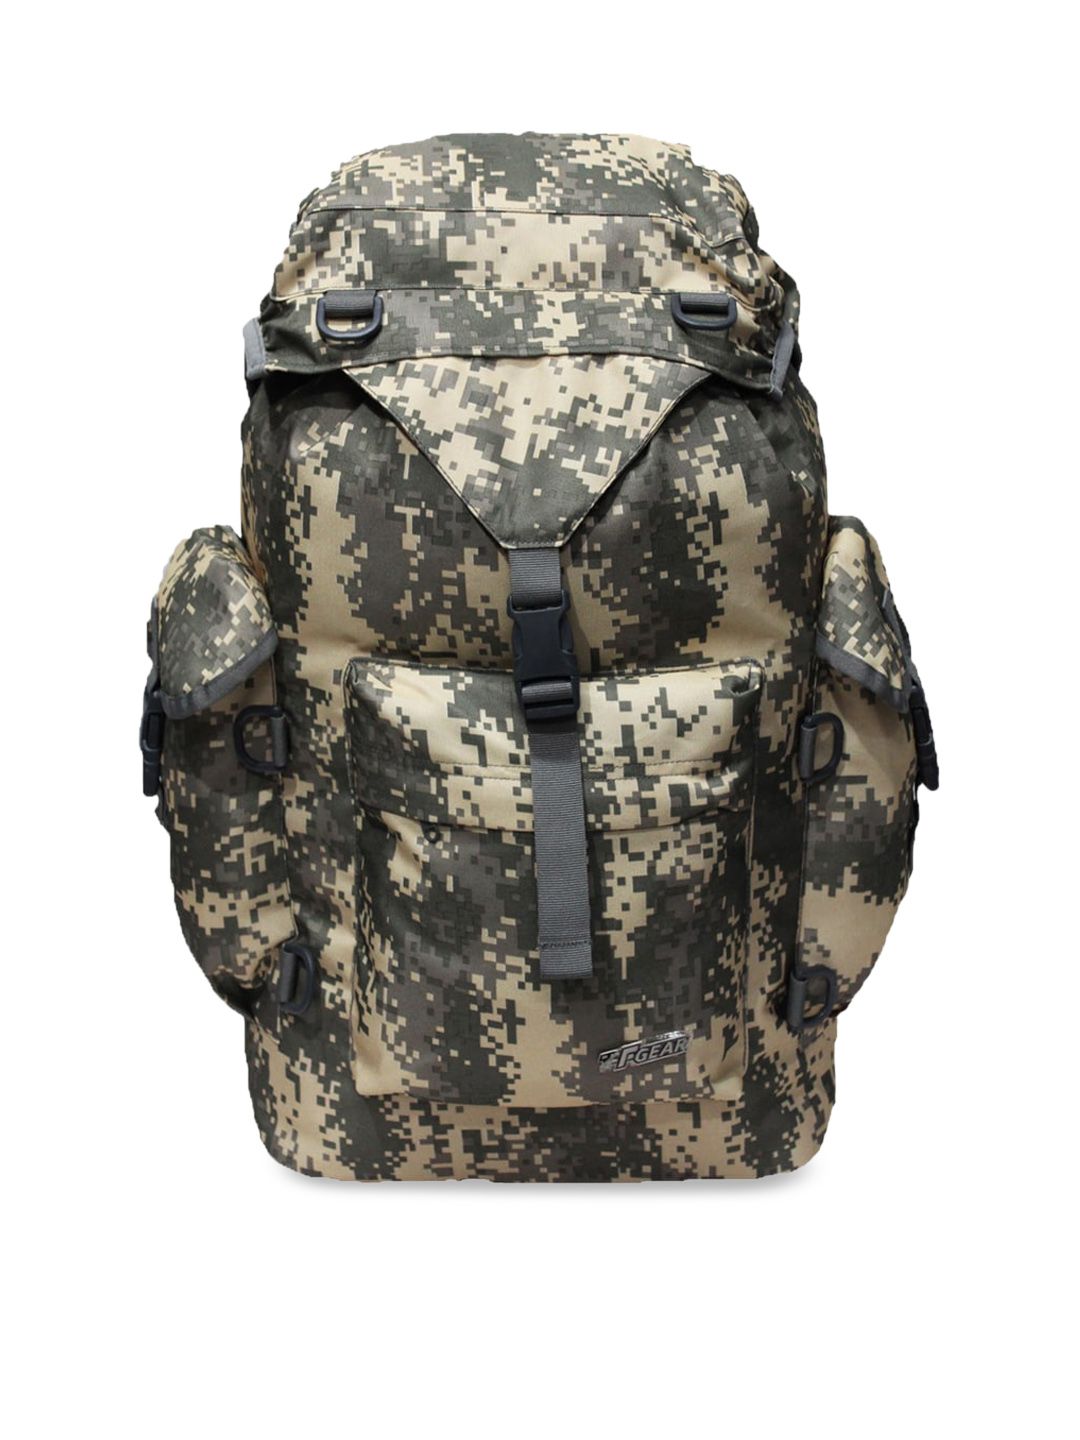 F Gear Unisex Grey & Cream-coloured Camouflage Backpack Price in India